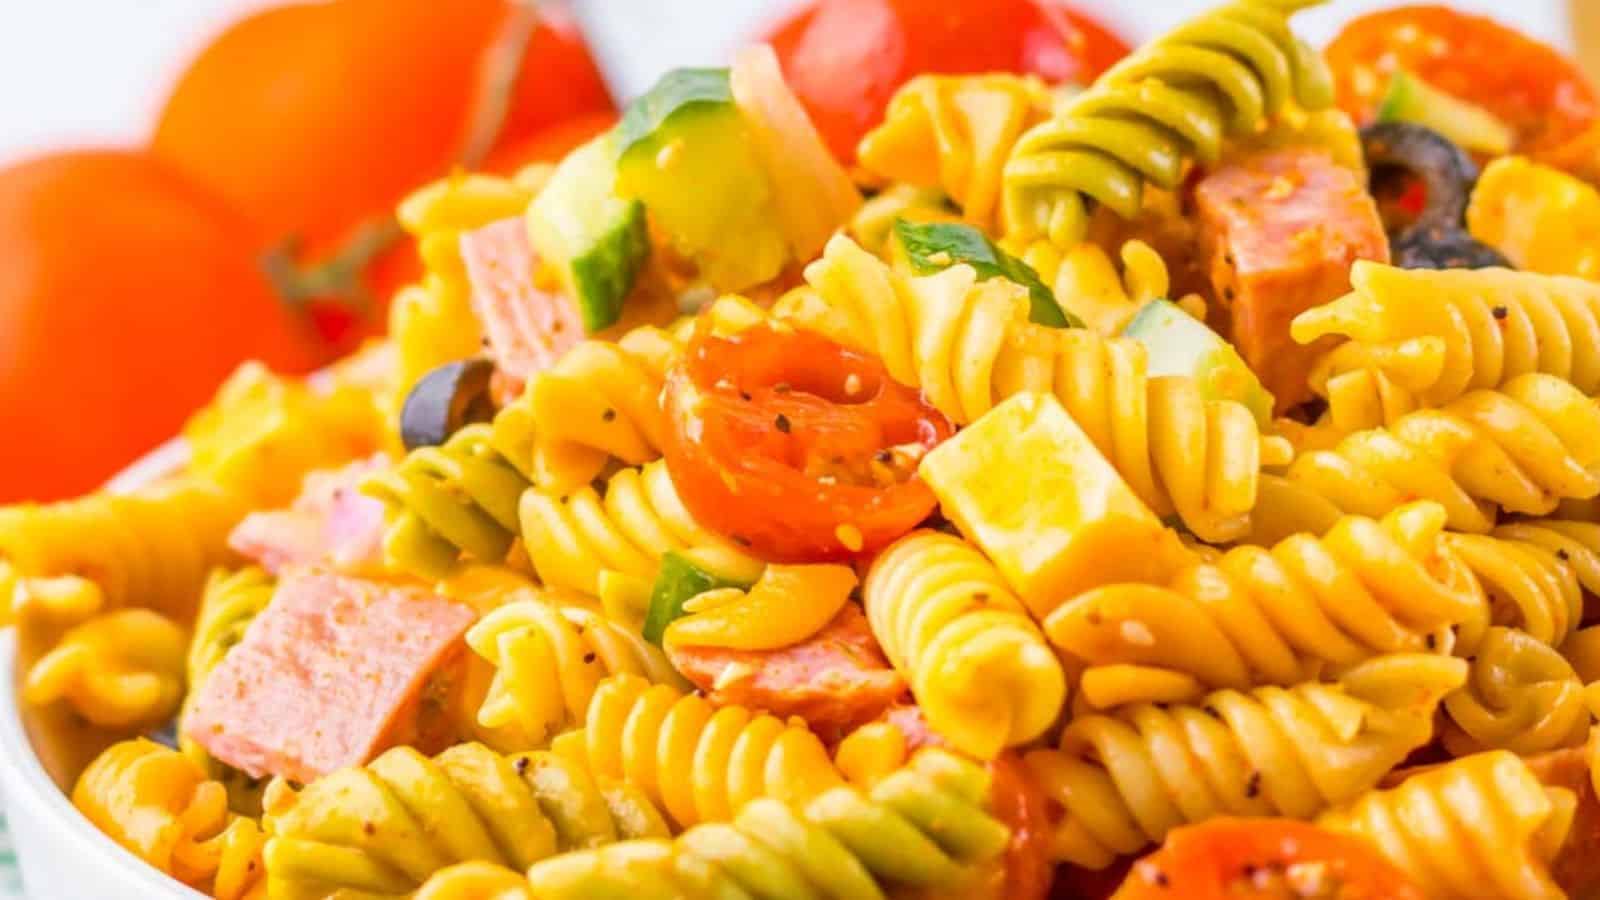 A vibrant pasta salad with fusilli, cherry tomatoes, bell peppers, black olives, and diced salami in a clear bowl.